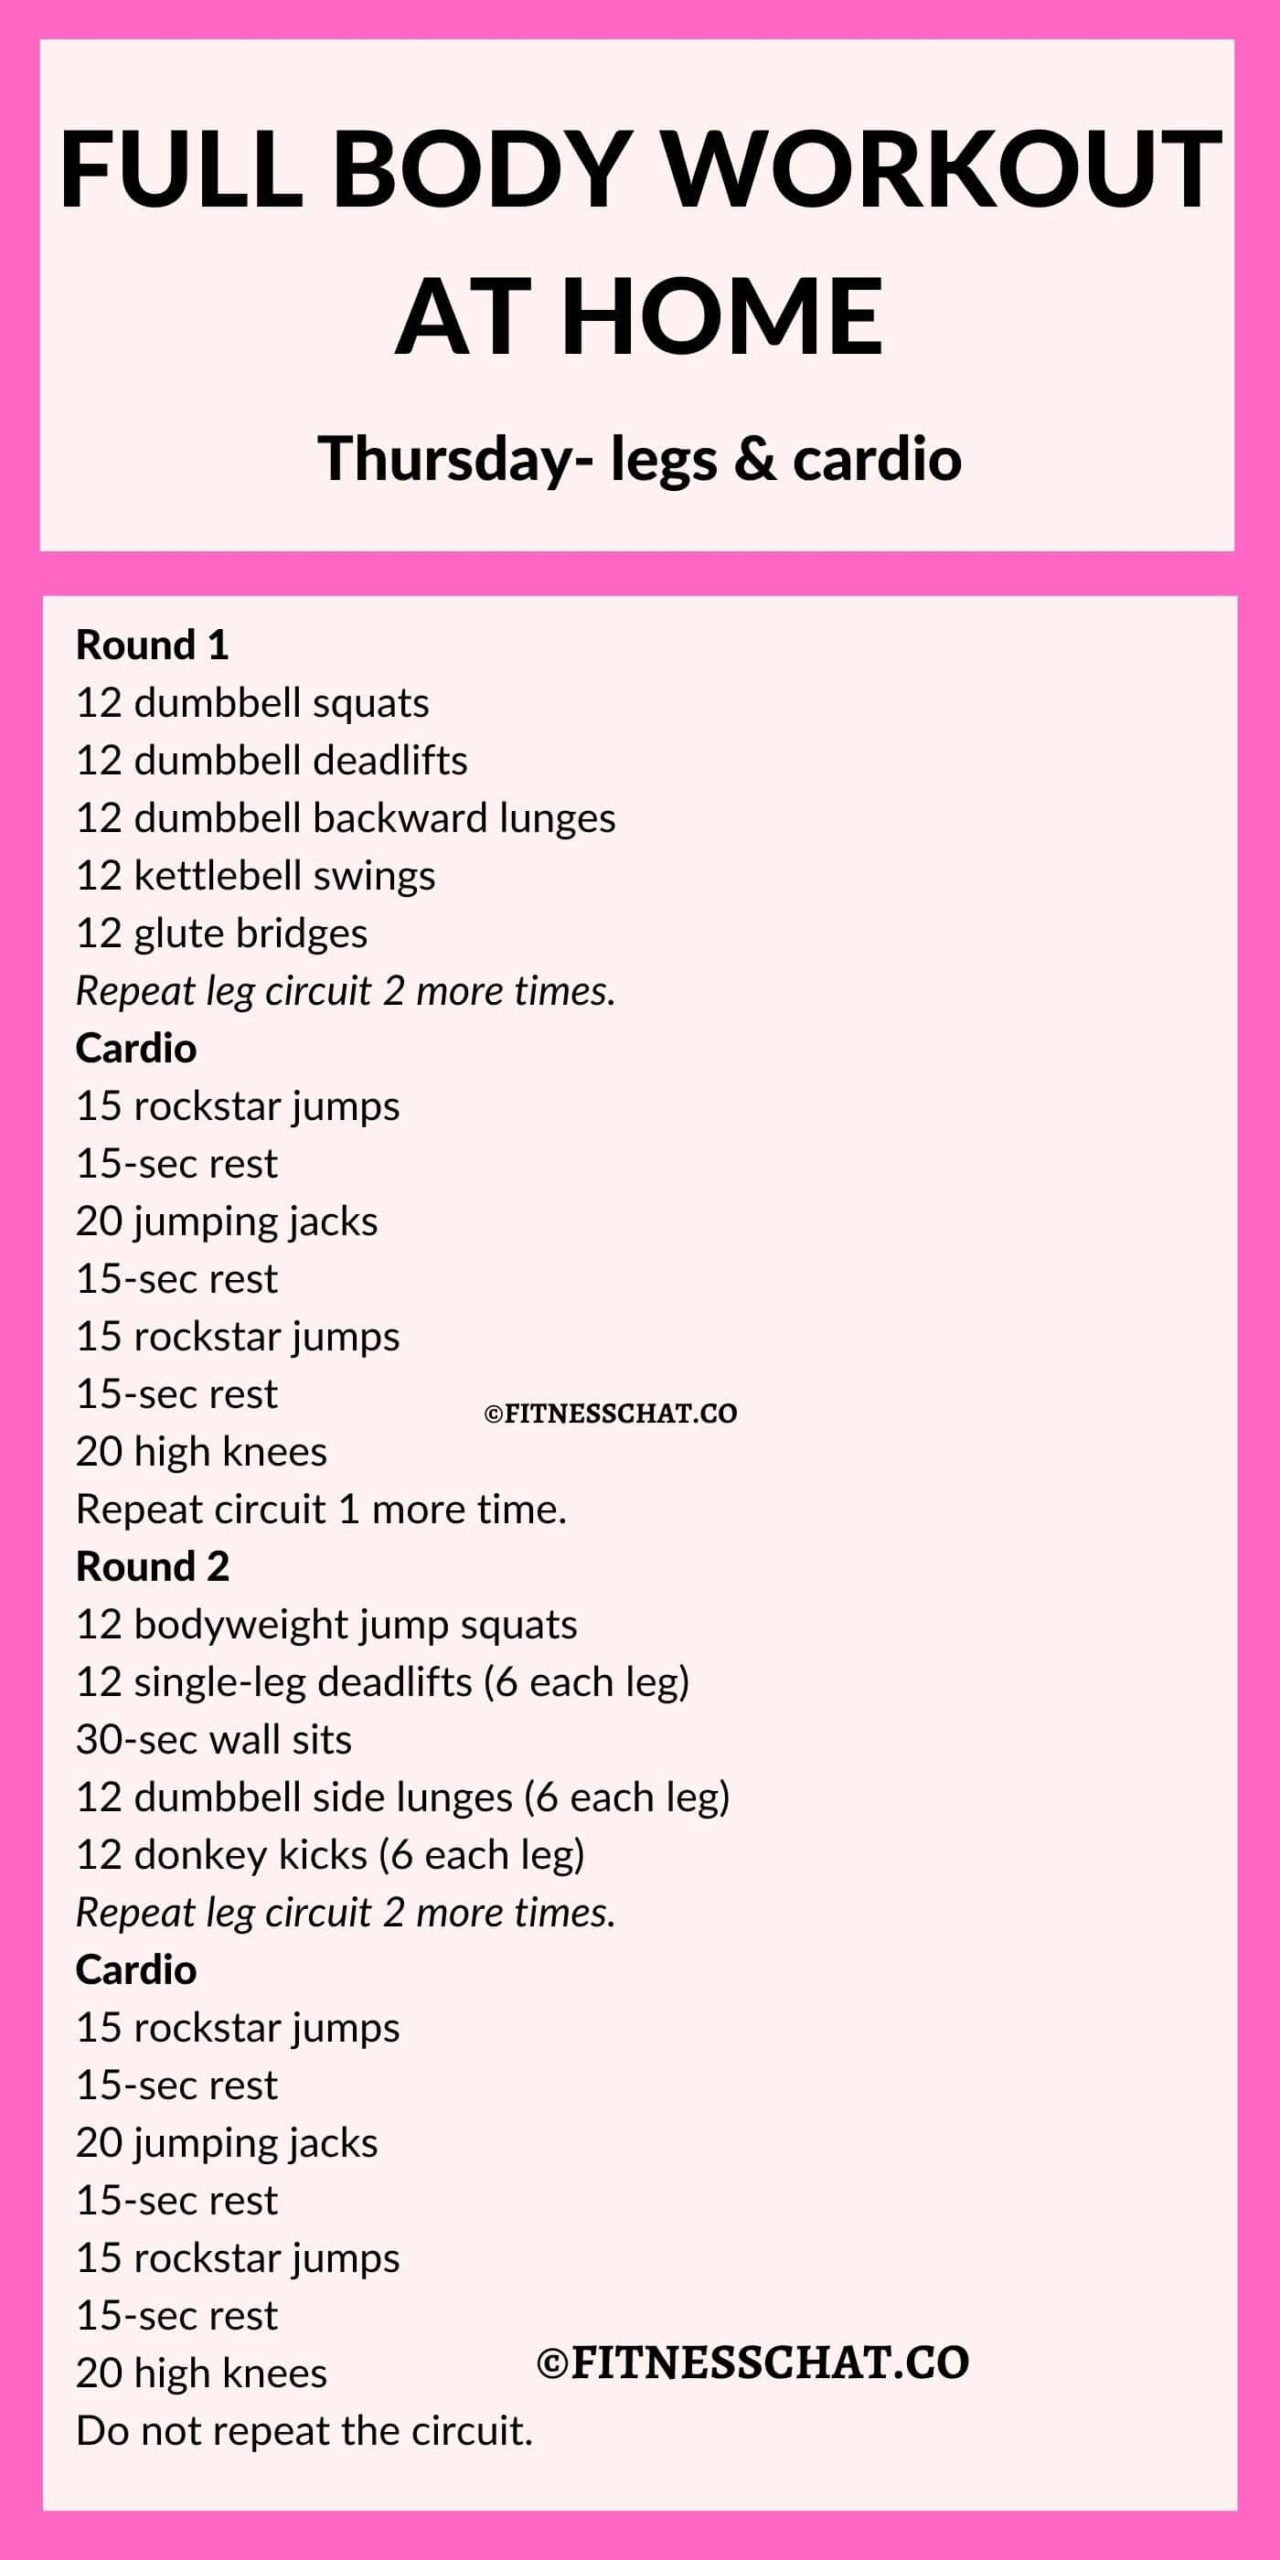 Full body workout at home for beginners - Thursday